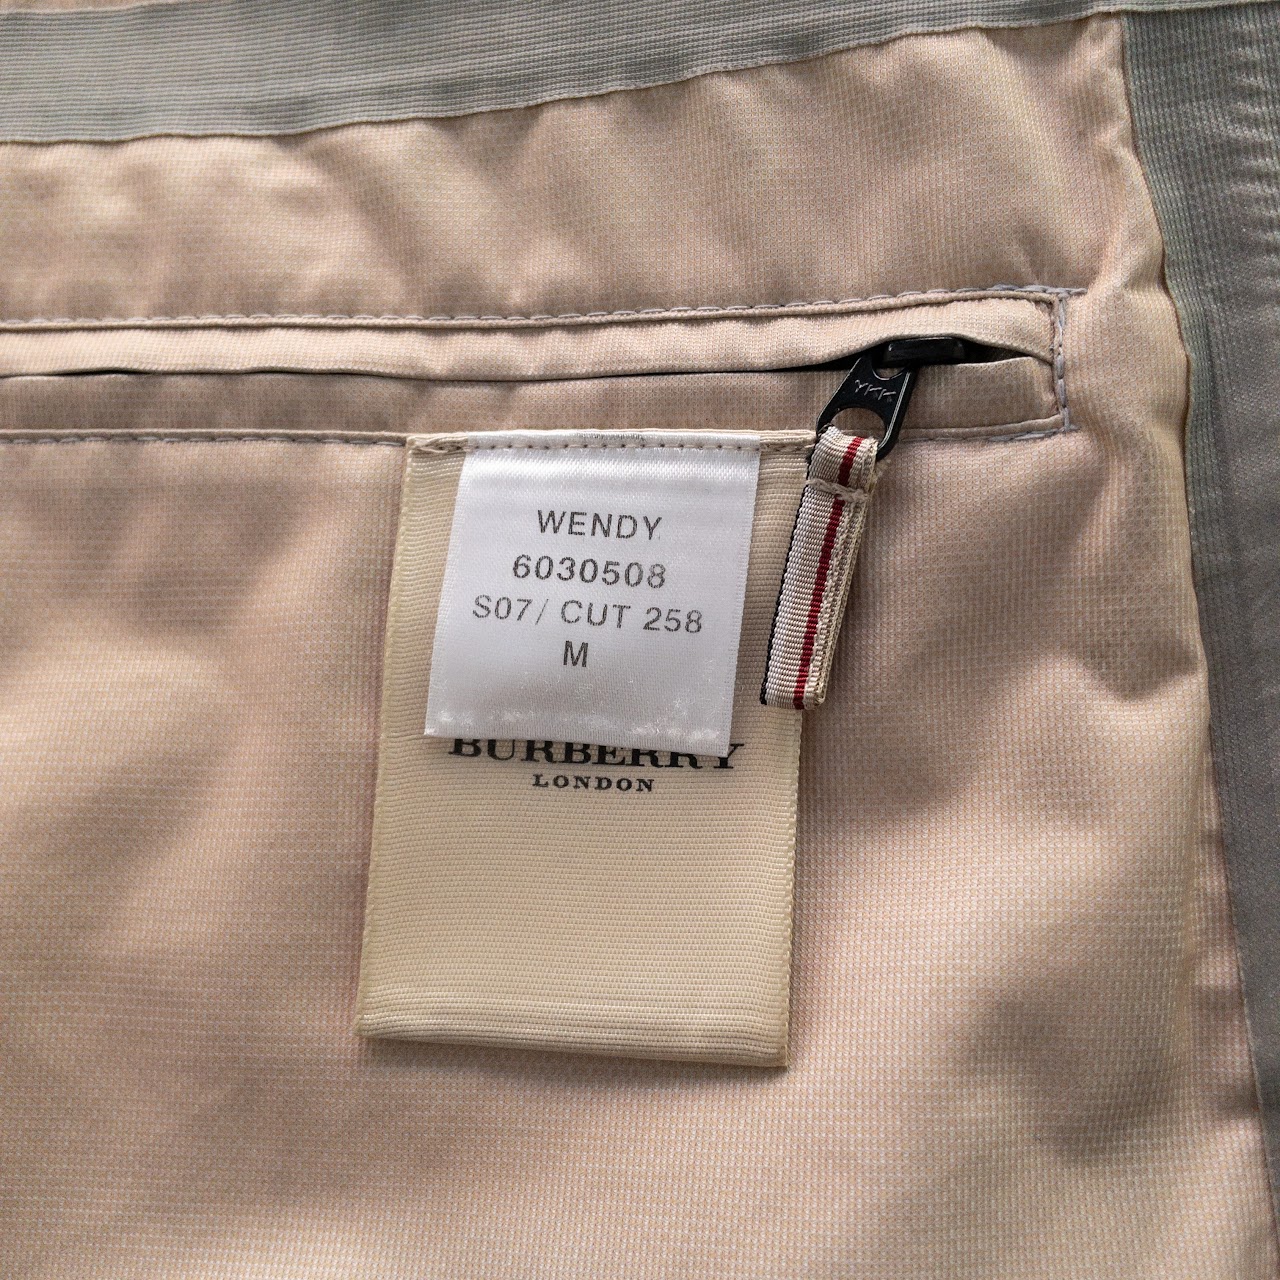 Burberry London Packable Wendy Jacket